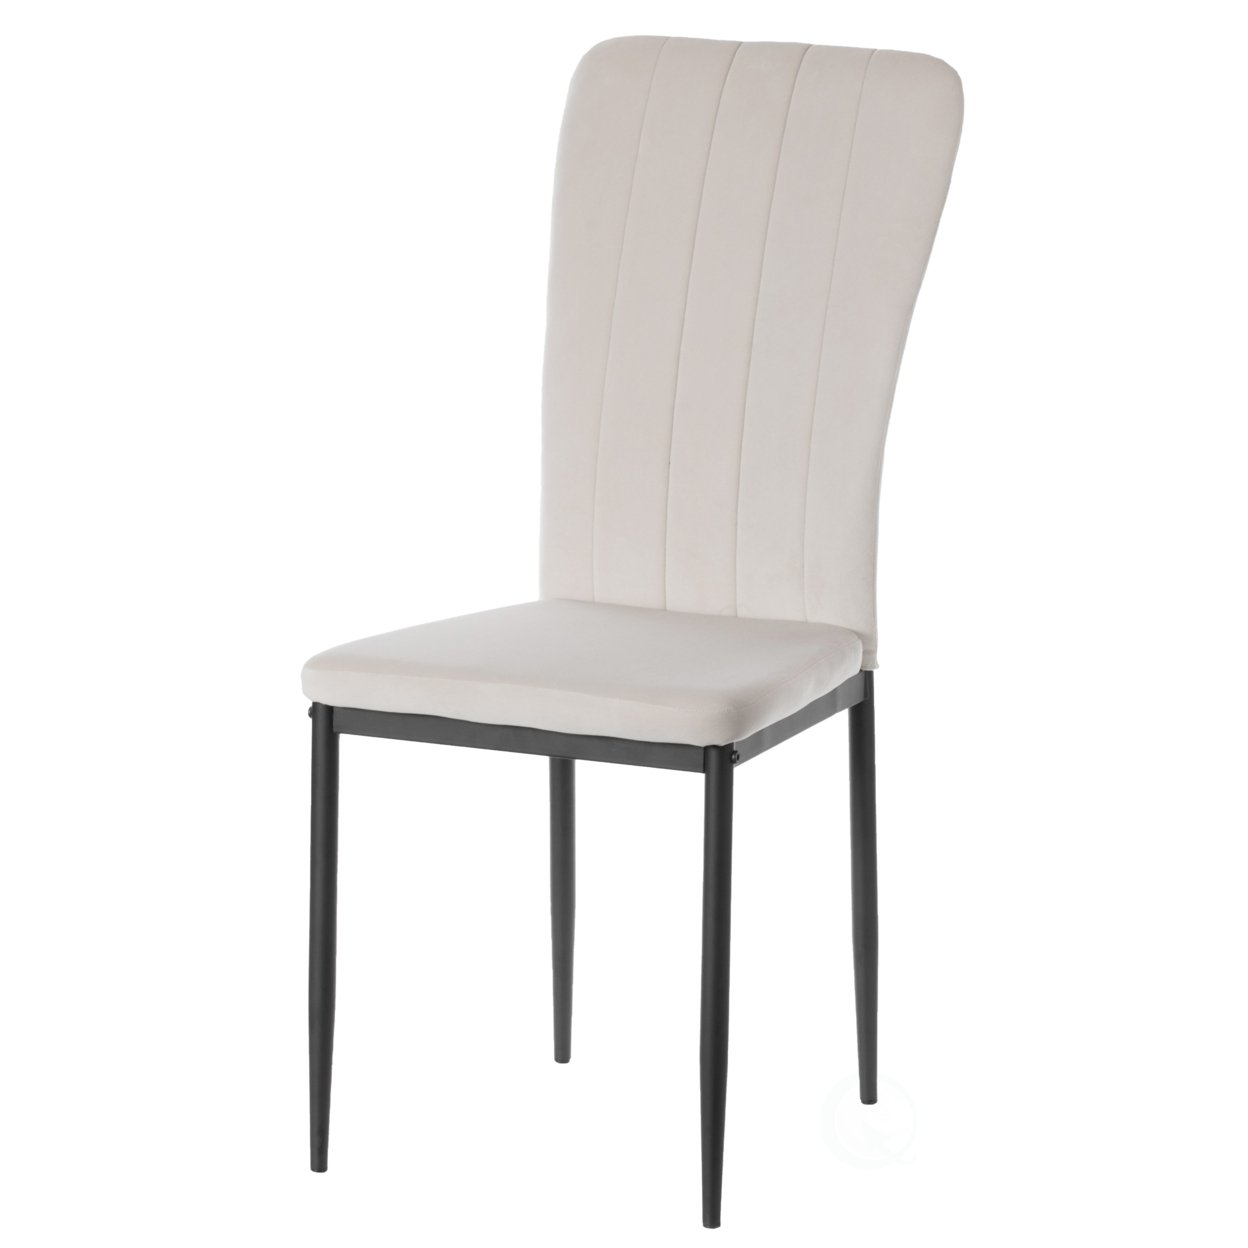 Modern And Contemporary Tufted Velvet Upholstered Accent Dining Chair - Single Beige